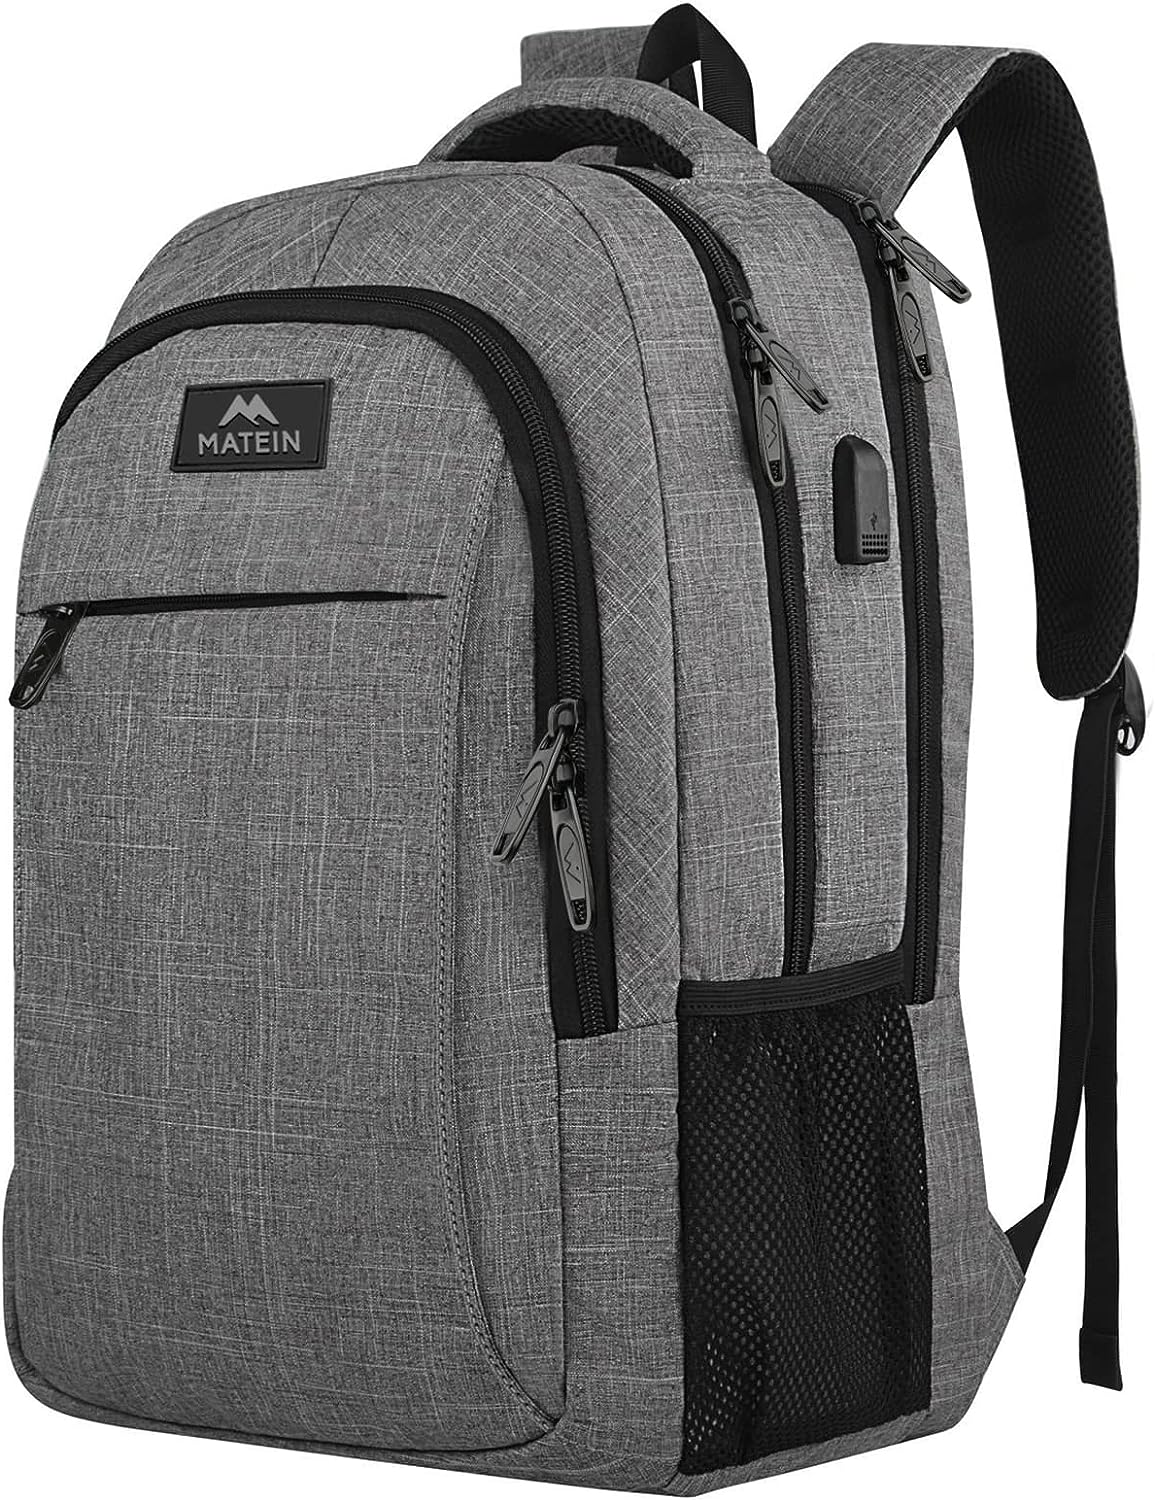 MATEIN Travel Laptop Backpack – The Ultimate Backpack for Everyday Needs